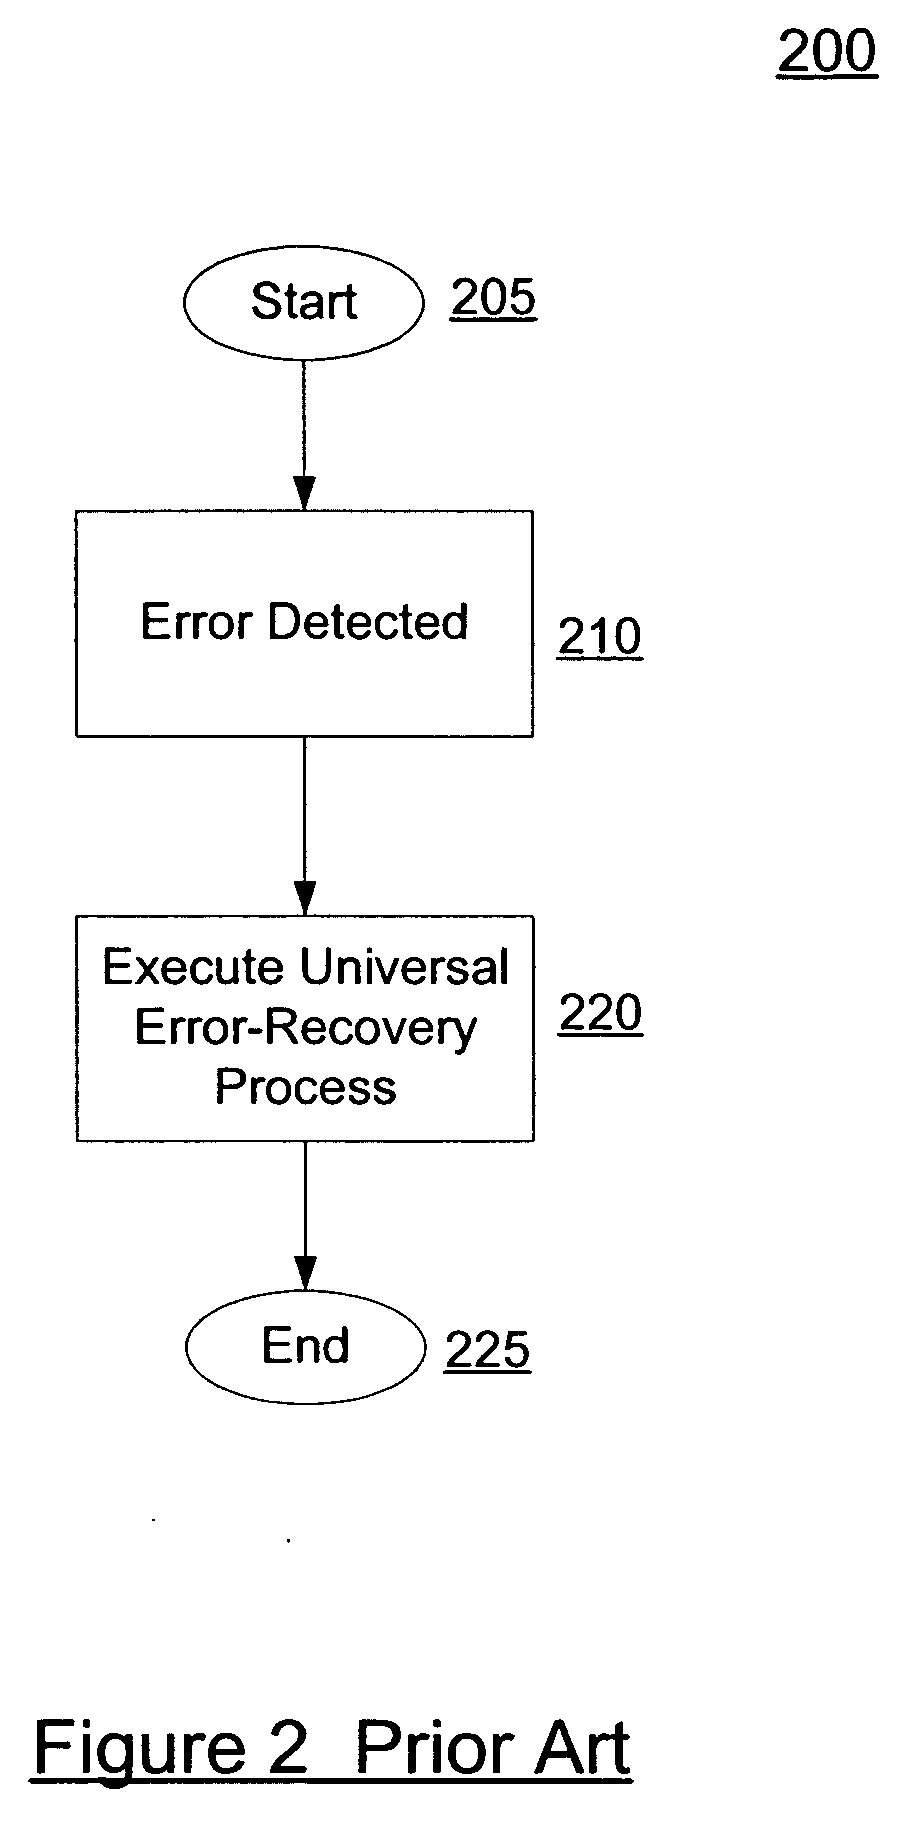 Enhanced methods for electronic storage device calibrations